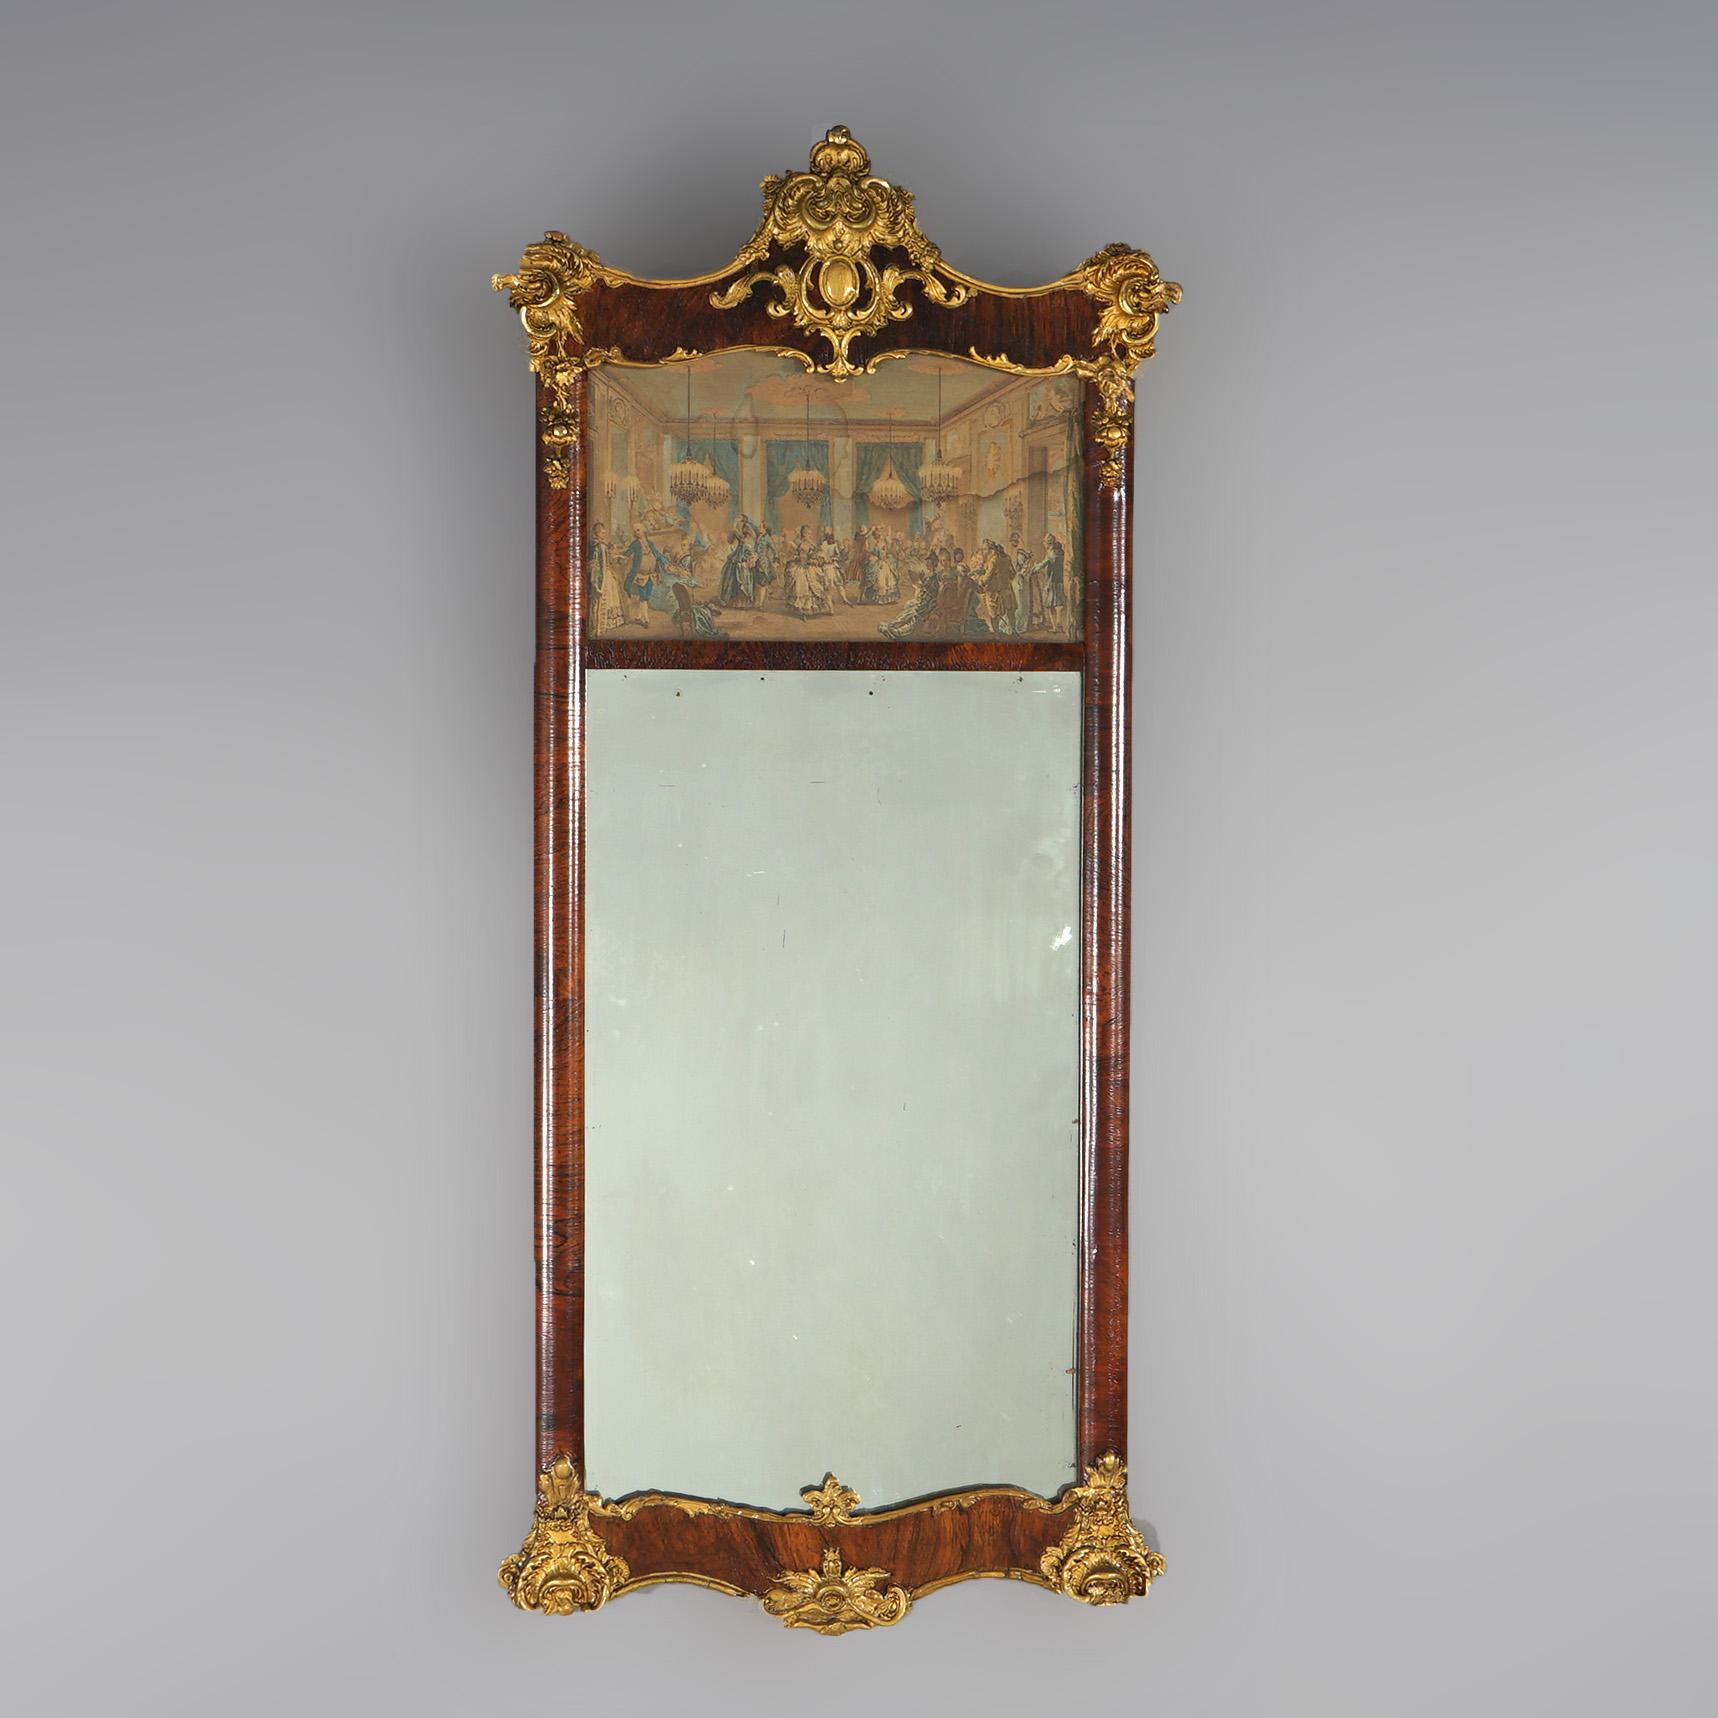 An antique Classical trumeau mirror offers rosewood frame with giltwood foliate trimming, ballroom scene in upper panel and lower mirror, circa 1890

Measures - 44.75